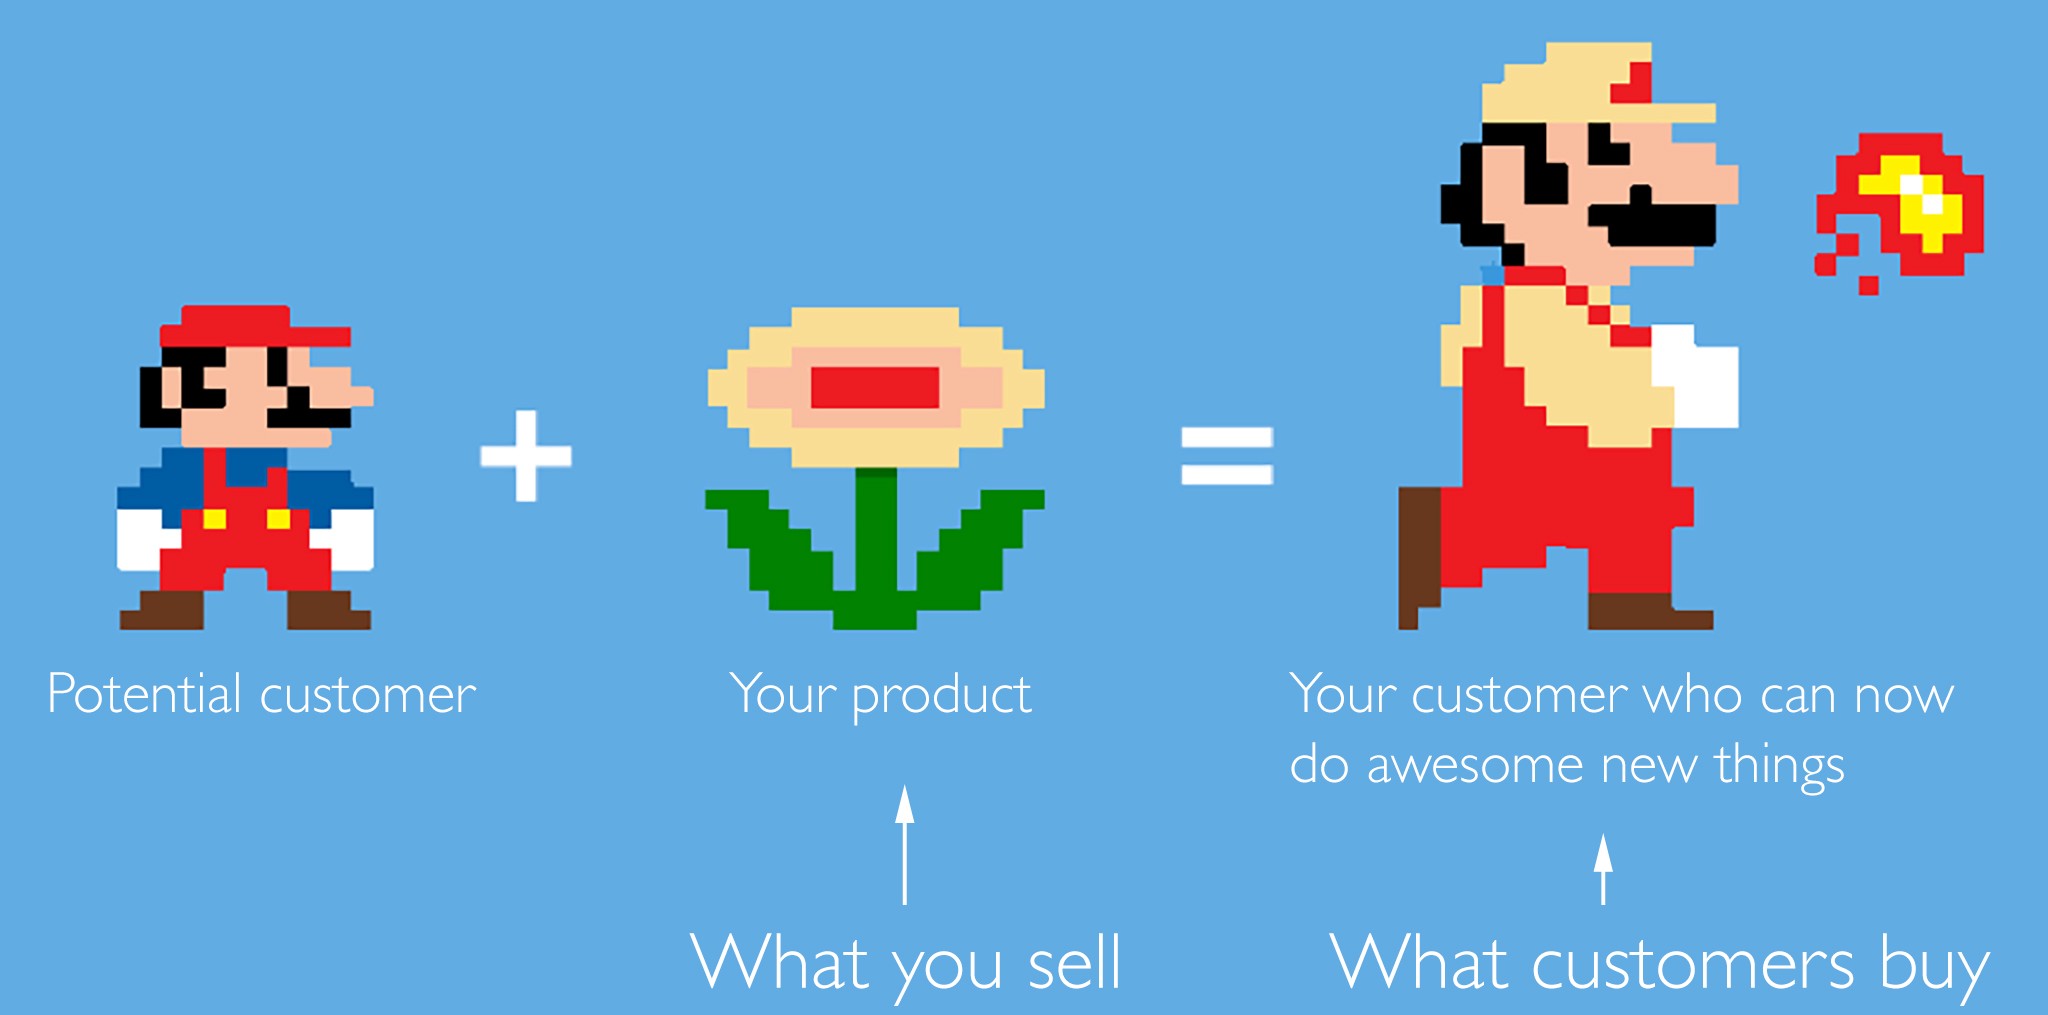 SAMUEL HULICK USES THIS ILLUSTRATION TO SHOW HOW CUSTOMERS USE PRODUCTS TO DESIGN A "NEW ME".